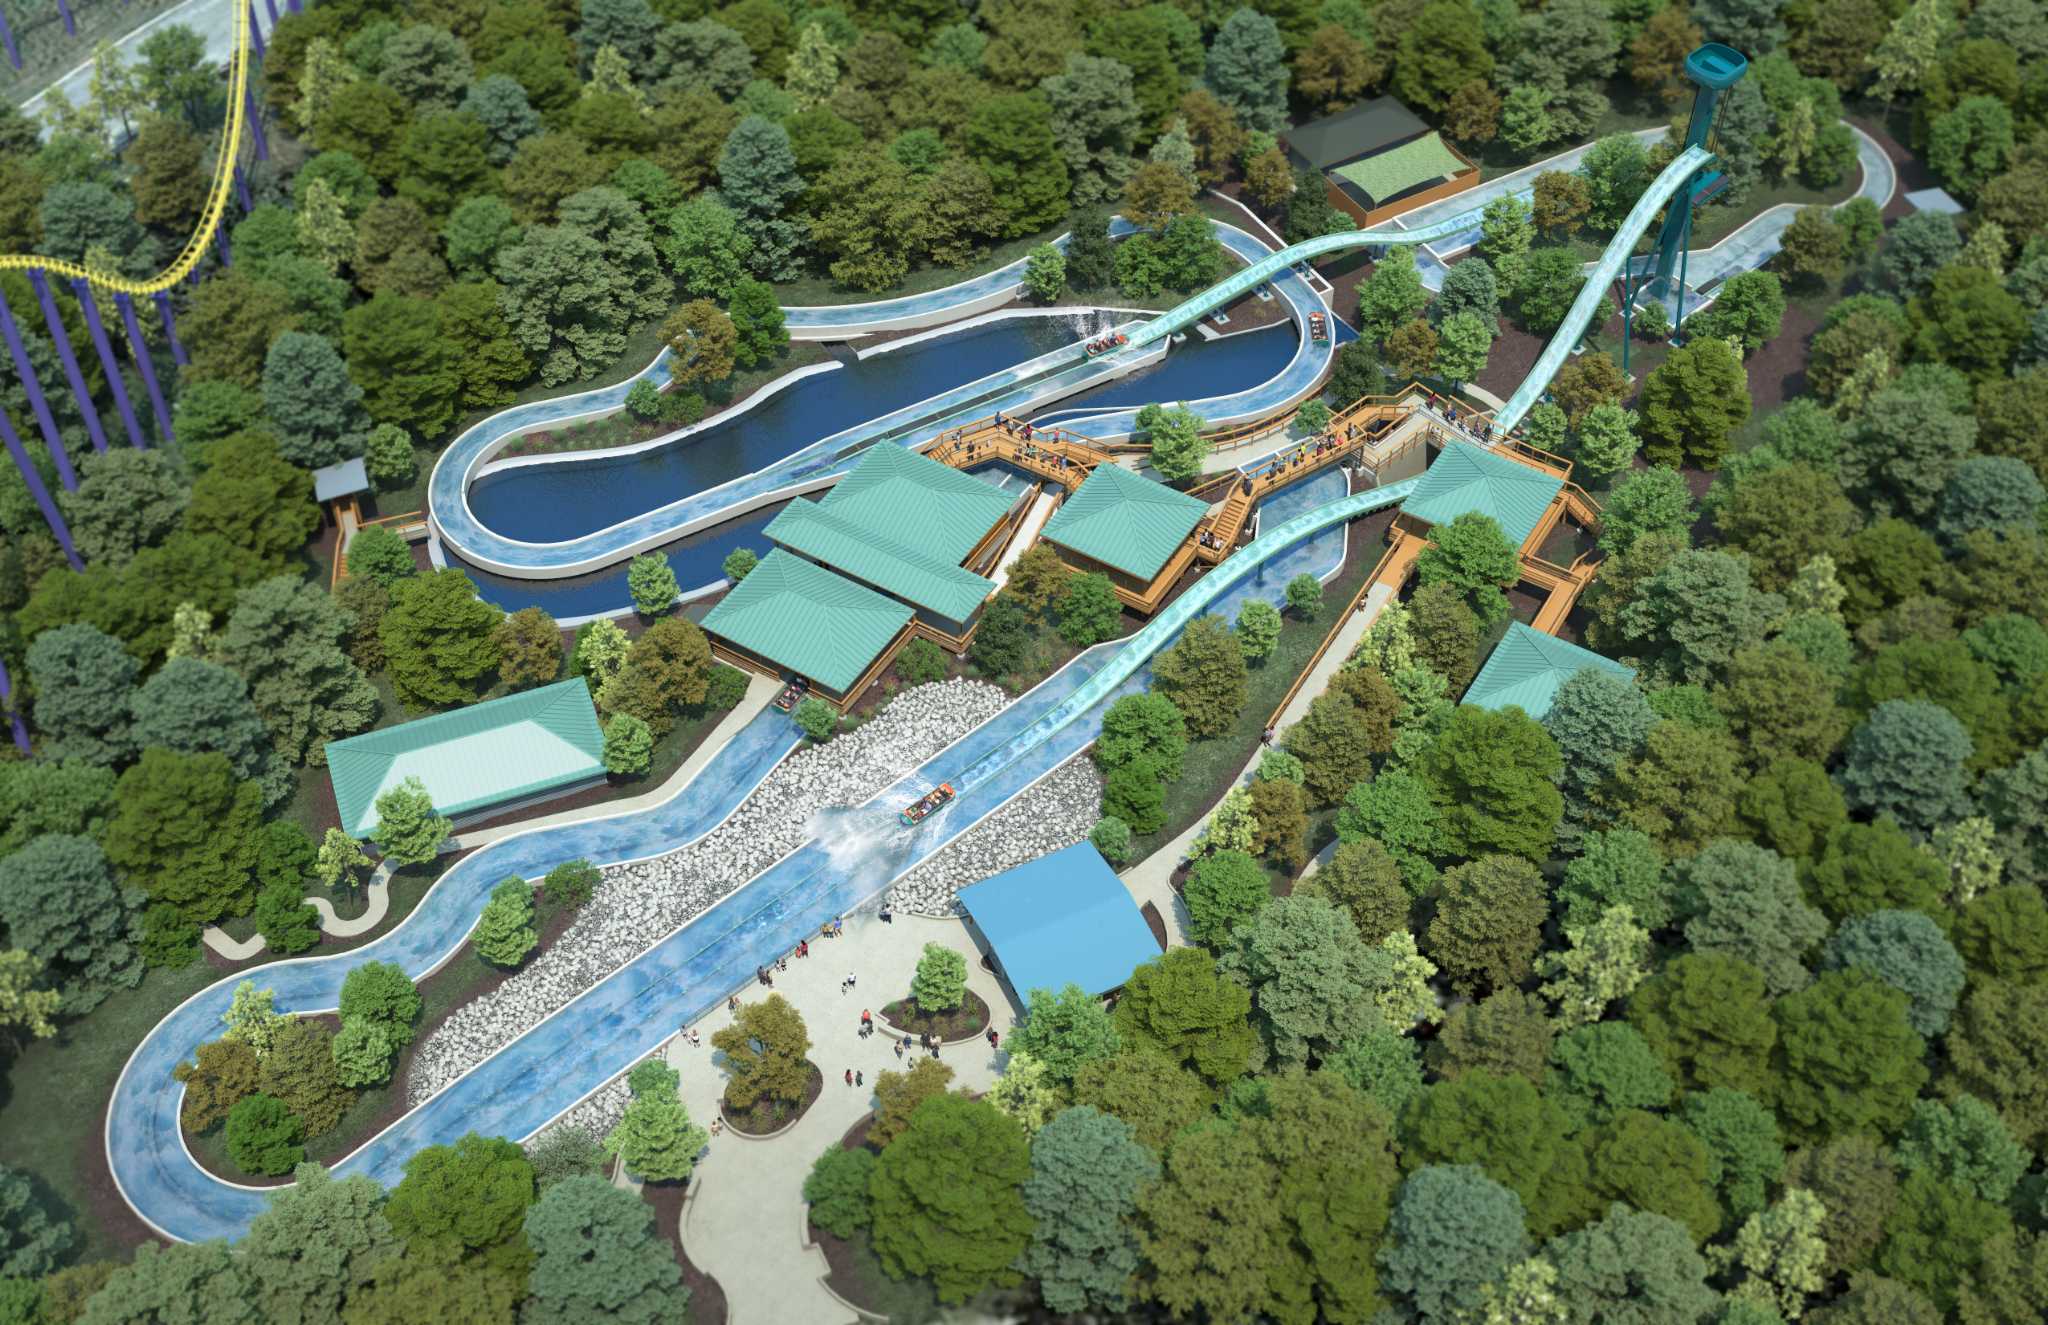 First-of-its-Kind New Rides to Open in Every SeaWorld Park in 2023  Including the World's First Surf Coaster, the Longest and Fastest Straddle  Coaster, and the World's First Launched Flume Coaster